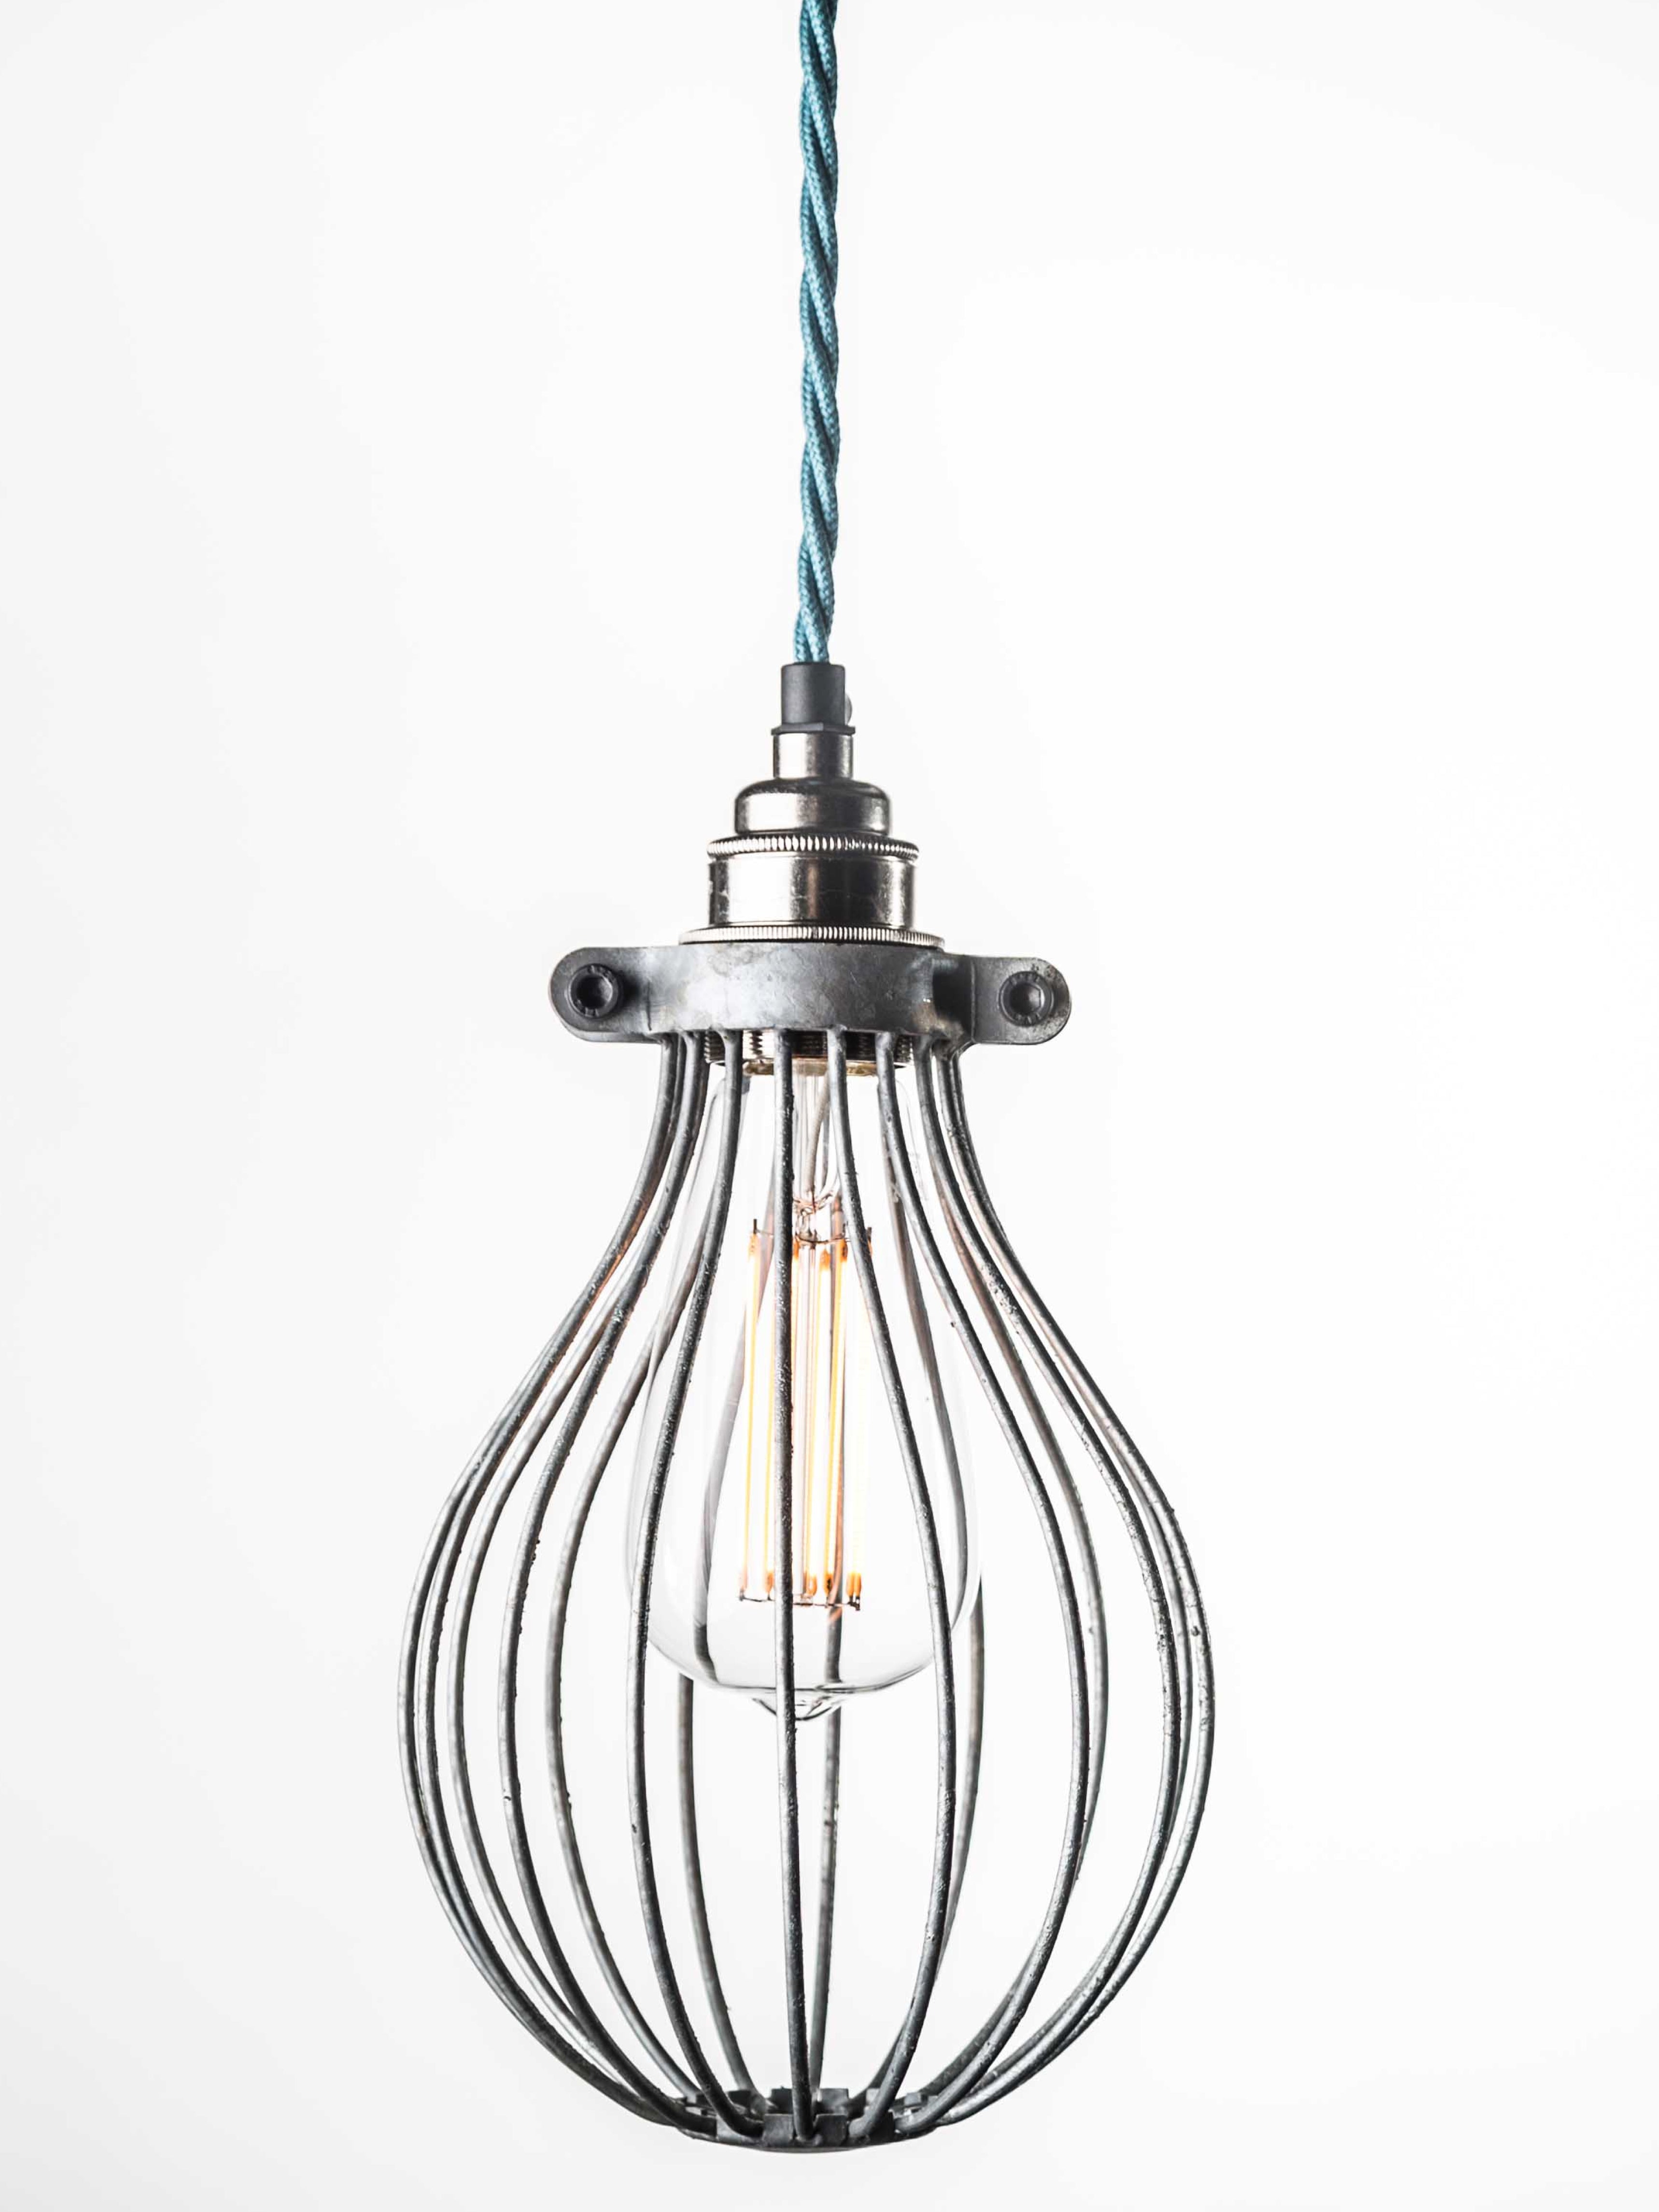 Galvanised Balloon Cage Pendant | End-Of-Line